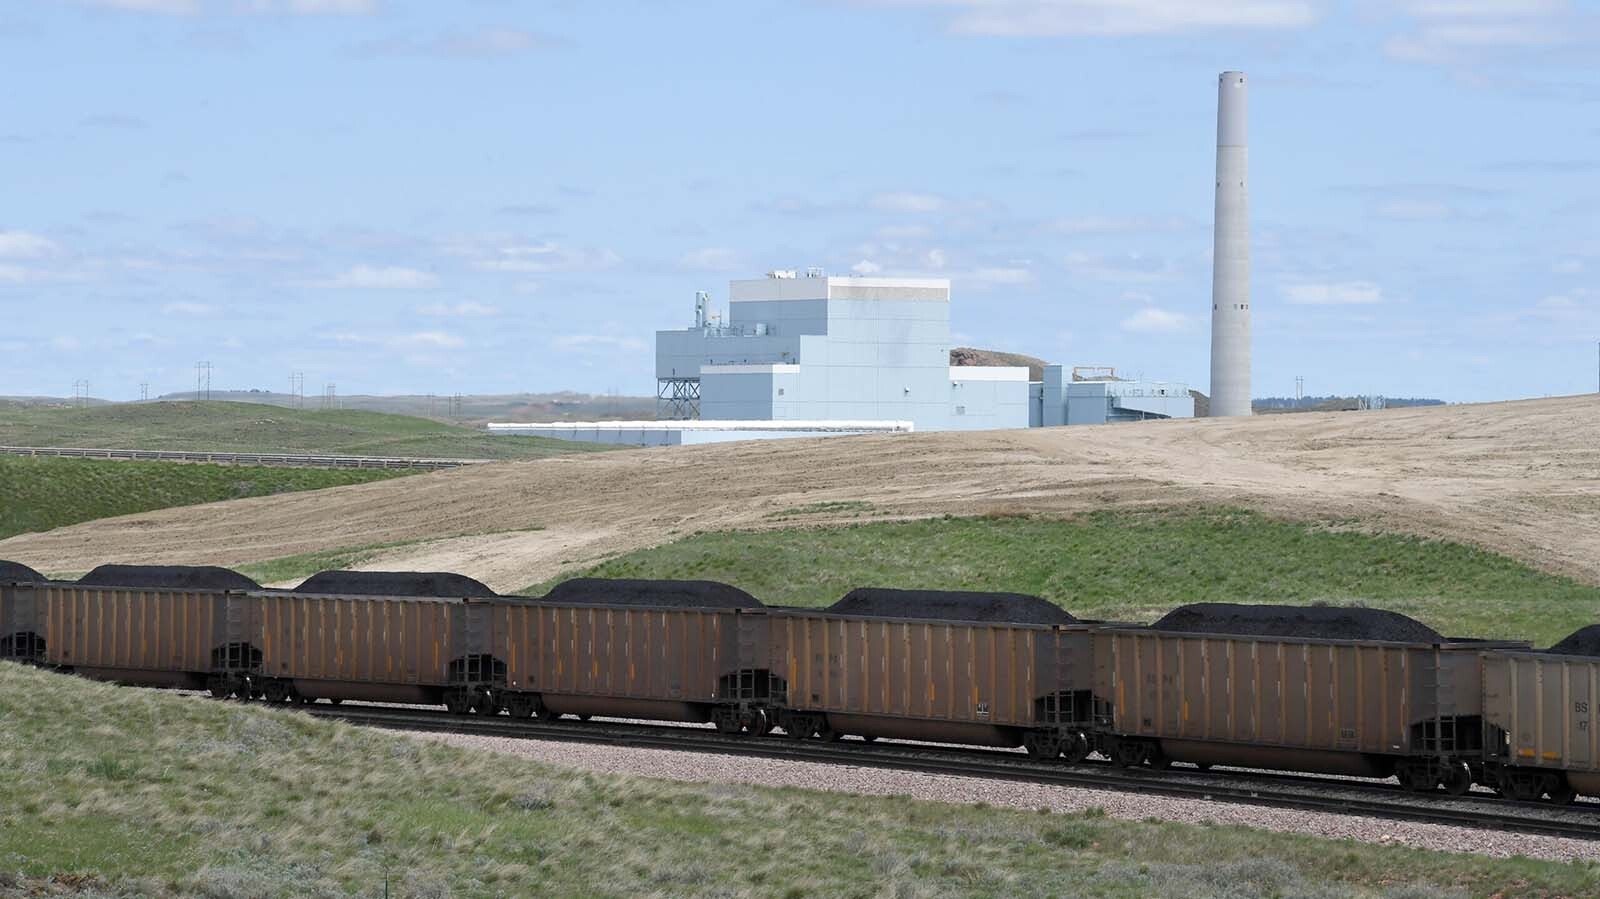 A full coal train rolls through Wyoming's Powder River Basin about 10 miles north of Gillette. The Dry Fork Station coal-fired power plant is in the background.